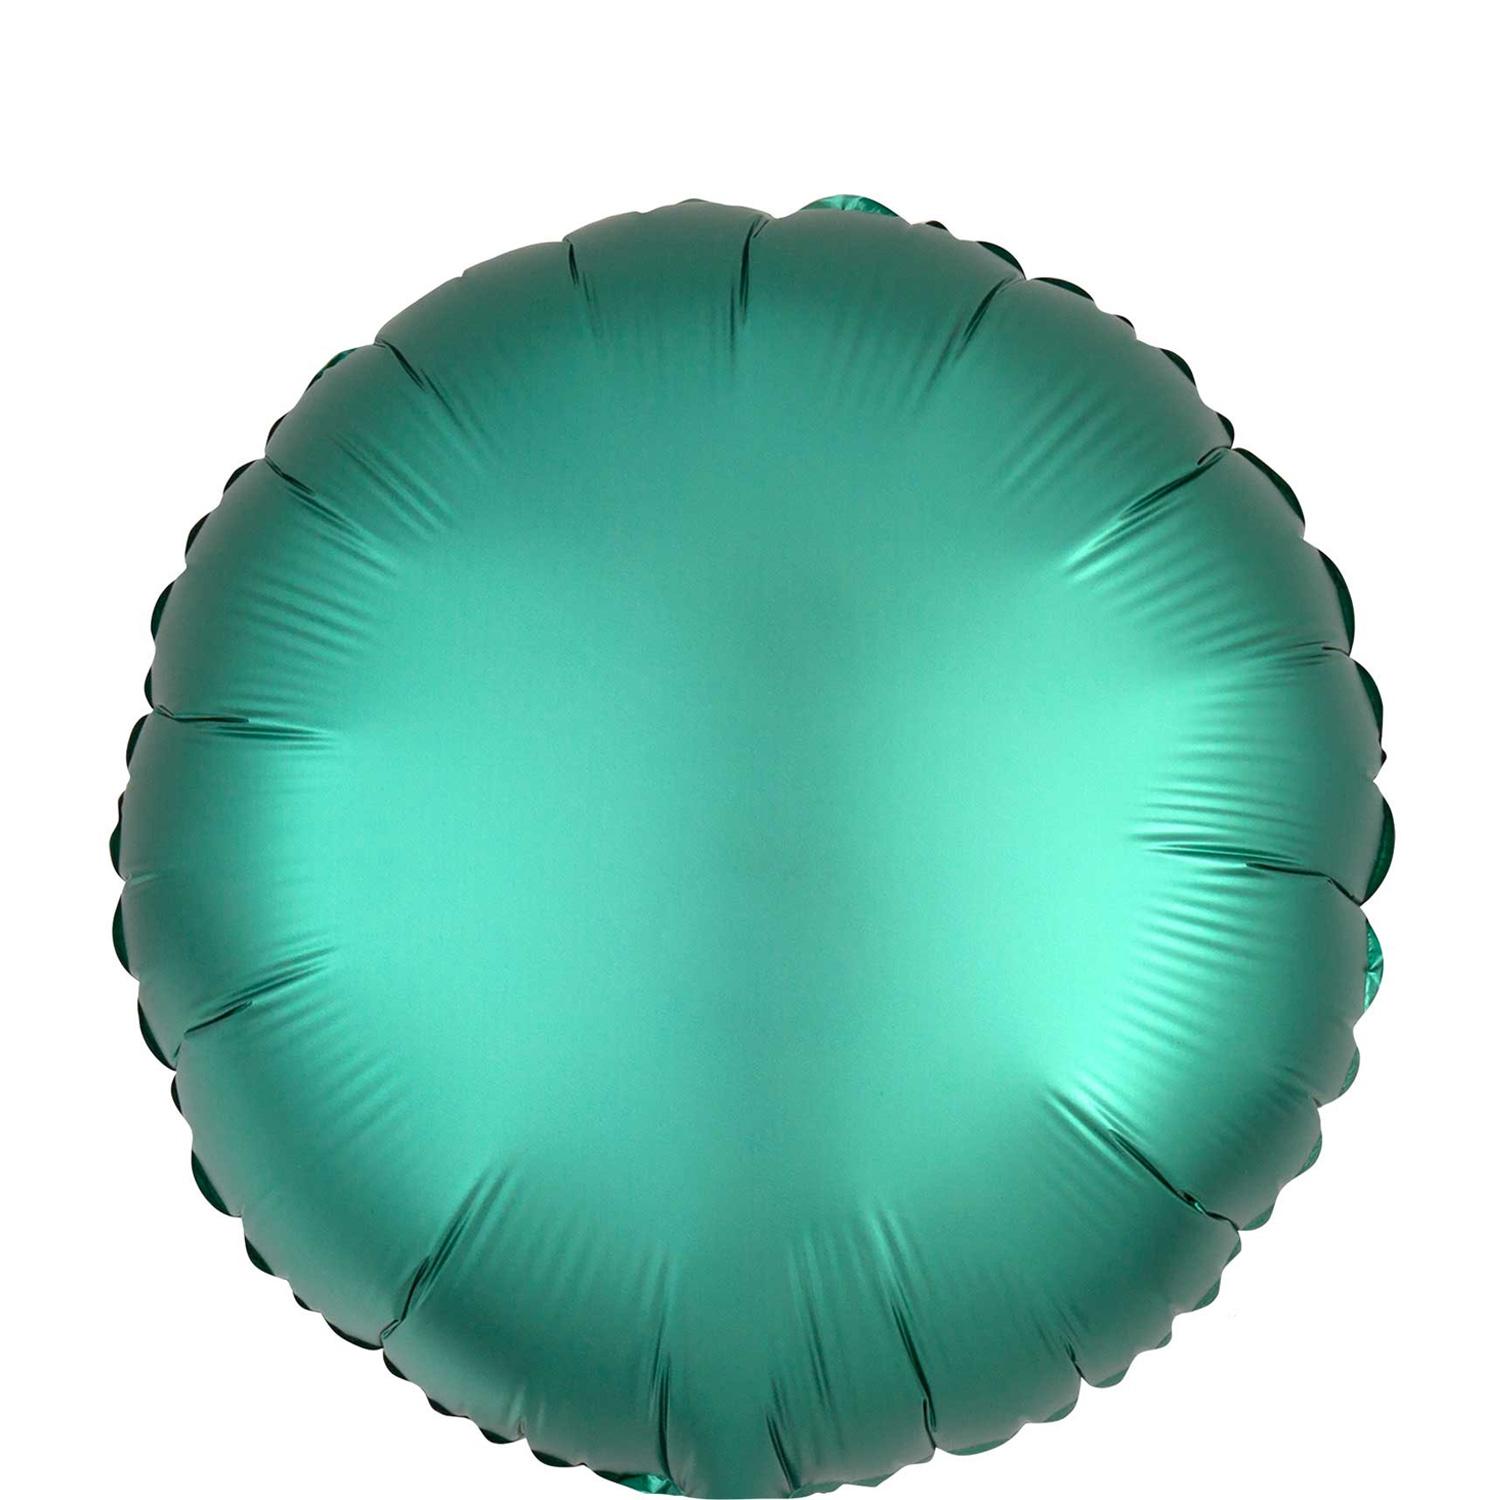 Satin Luxe Jade Round Foil Balloon 45cm Balloons & Streamers - Party Centre